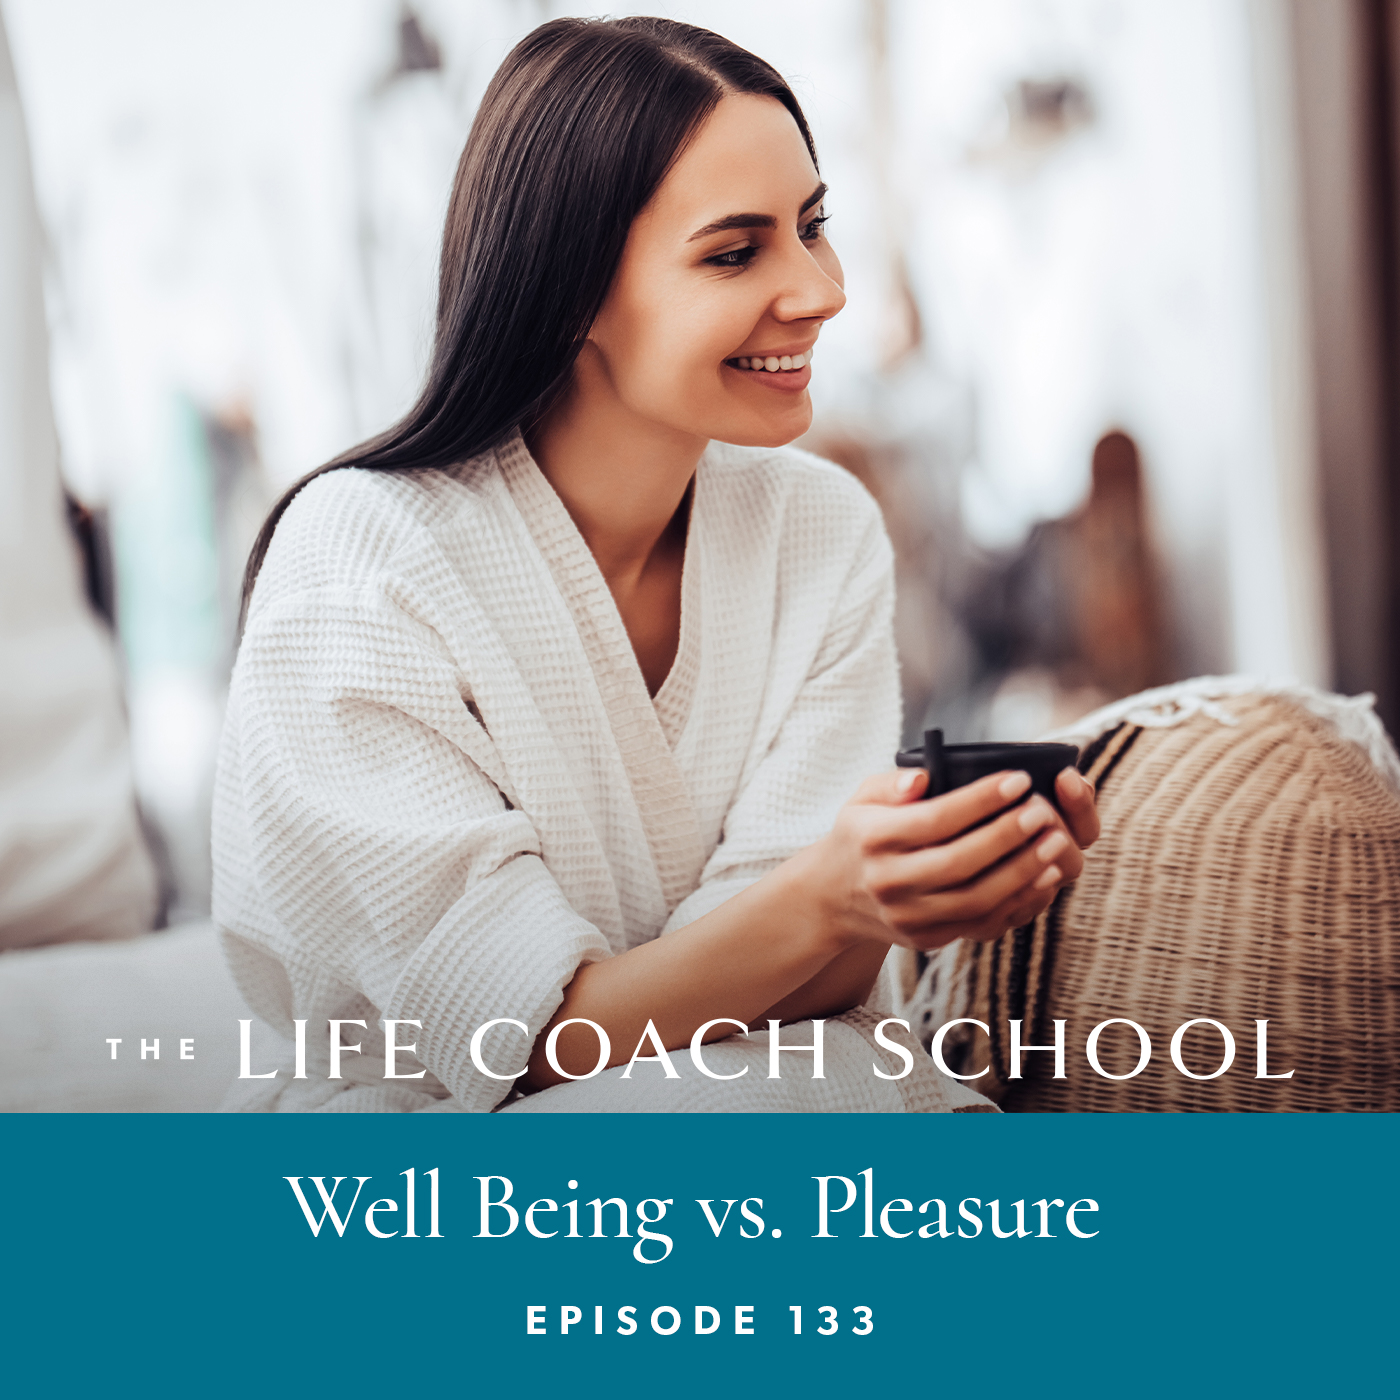 The Life Coach School Podcast with Brooke Castillo | Episode 133 | Well-Being vs Pleasure